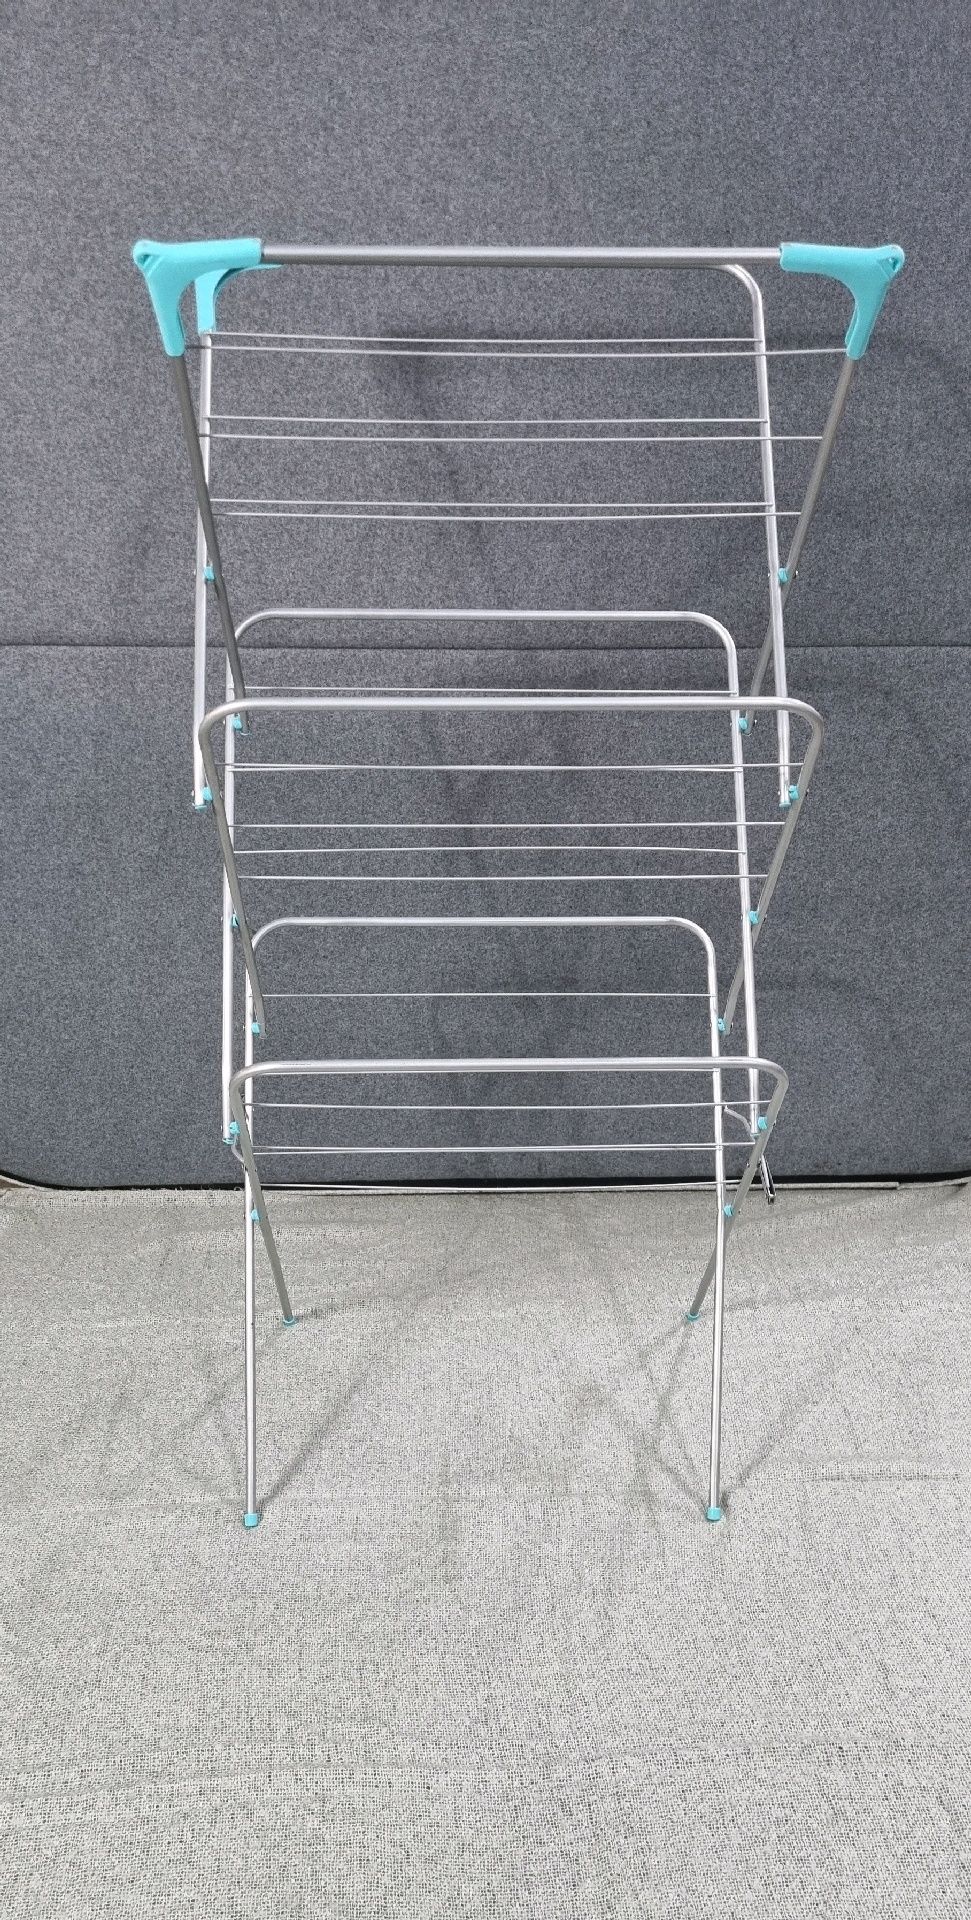 Foldable Metal Clothes Airer/Dryer